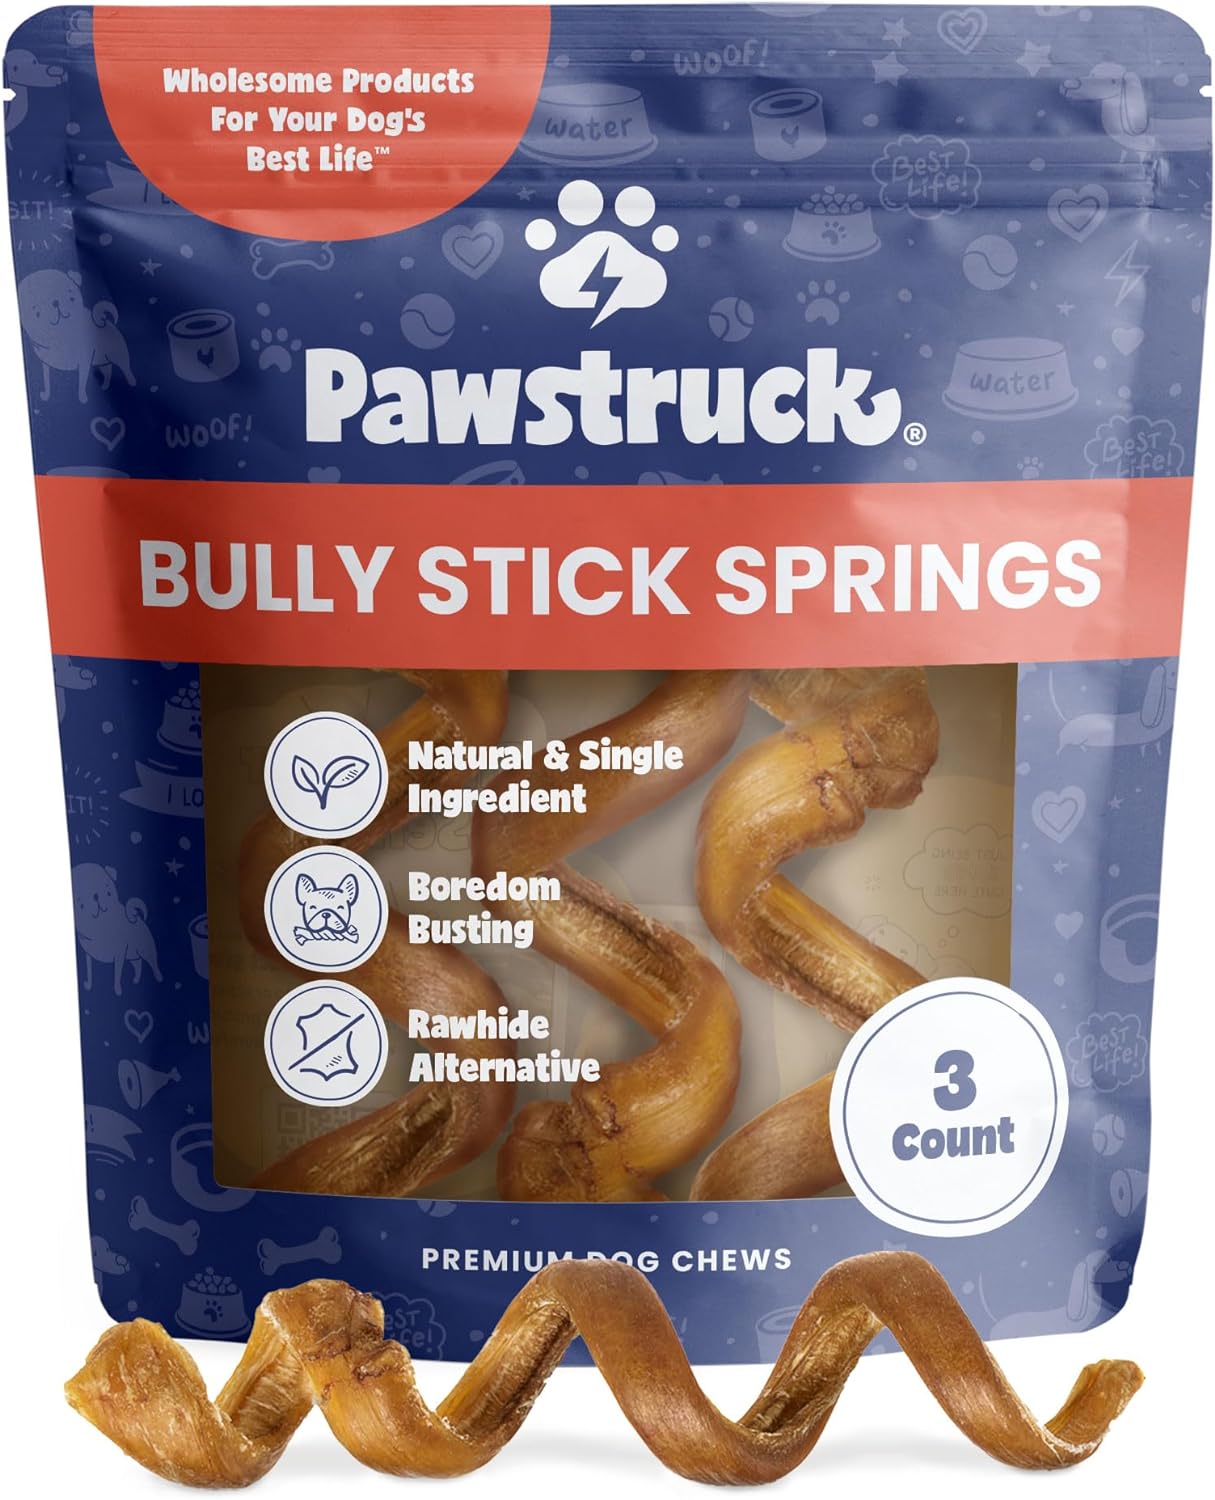 Pawstruck All-Natural 6" Bully Stick Springs for Dogs - Fun Challenging Rawhide Free 100% Beef Single Ingredient Chew Treat Bones - Fully Digestible Low Odor - 3 Pack - Packaging May Vary